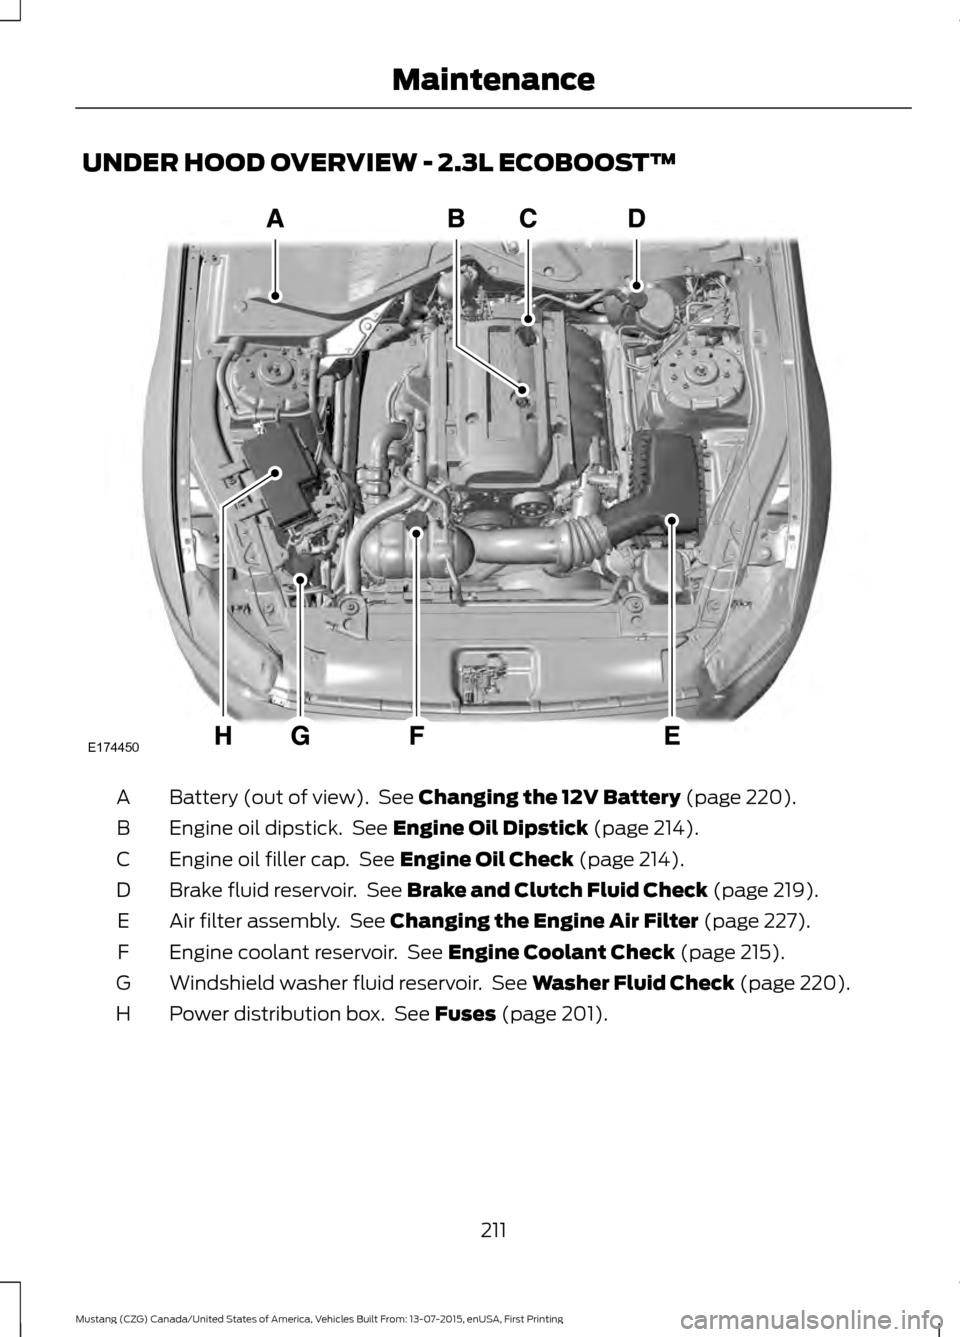 FORD MUSTANG 2016 6.G Owners Manual UNDER HOOD OVERVIEW - 2.3L ECOBOOST™
Battery (out of view).  See Changing the 12V Battery (page 220).
A
Engine oil dipstick.  See 
Engine Oil Dipstick (page 214).
B
Engine oil filler cap.  See 
Engi